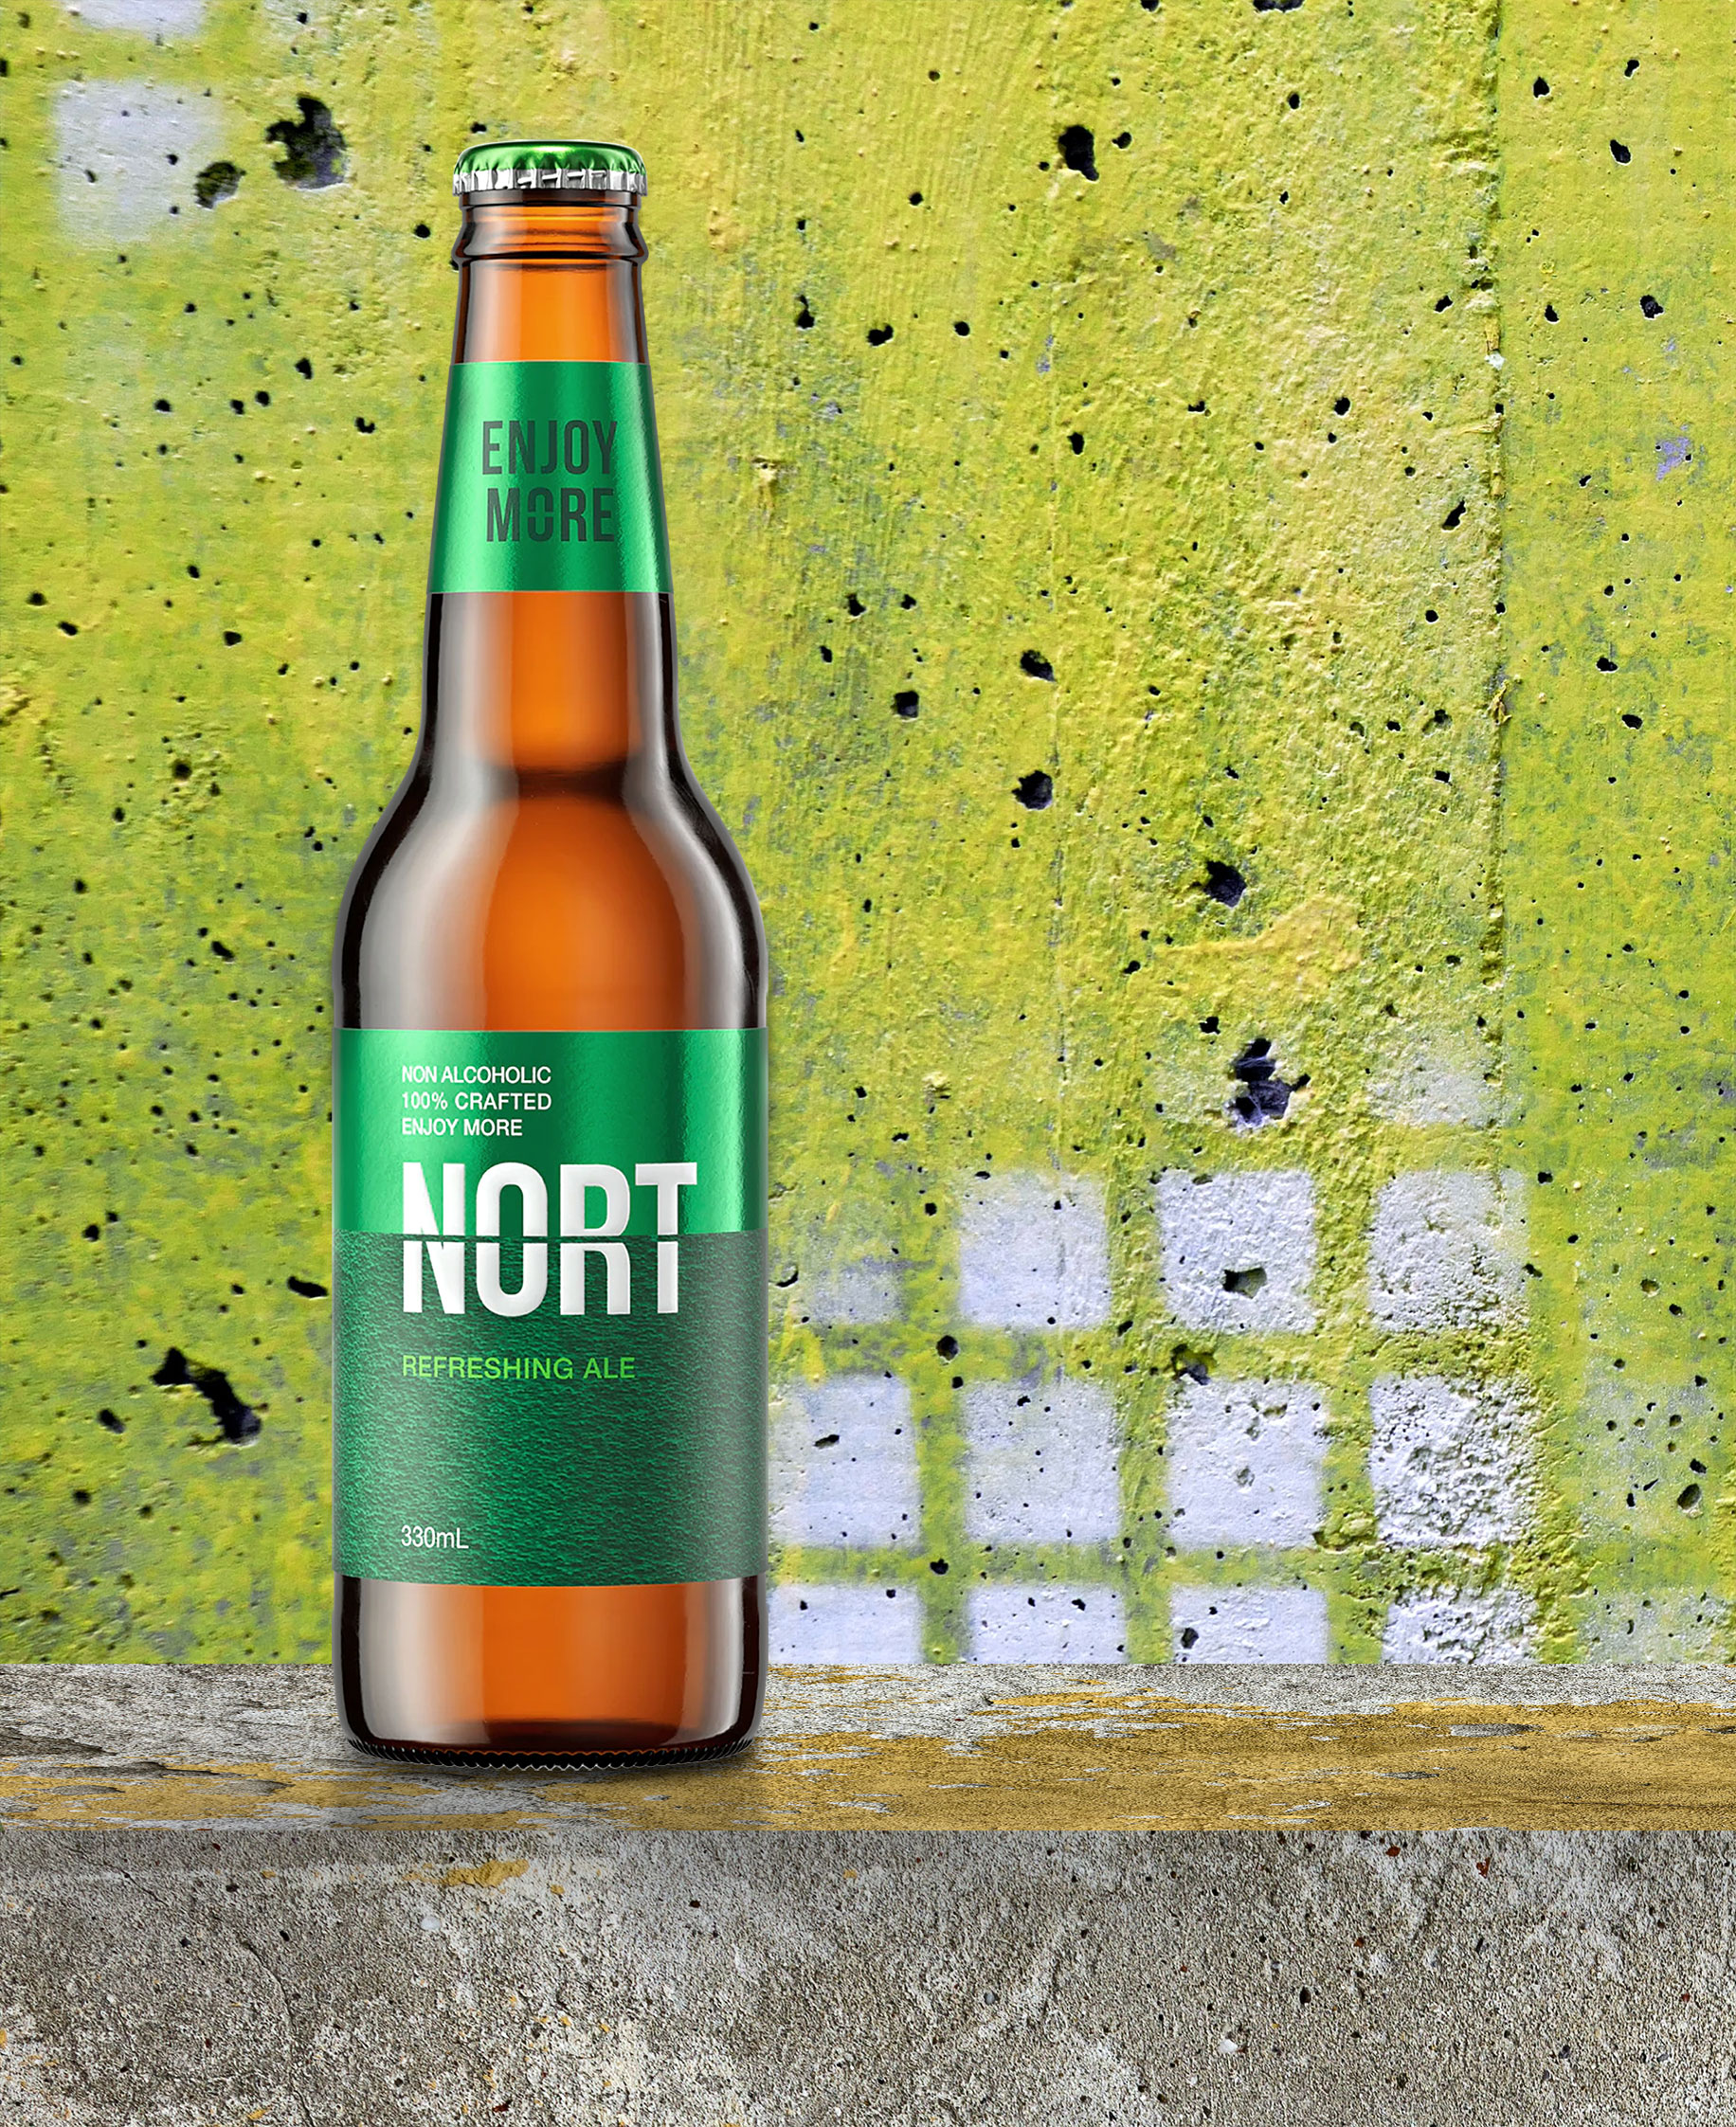 The Nort Pacific Ale is an aromatic gem, delivering an easy-drinking session ale, summer Australian style.